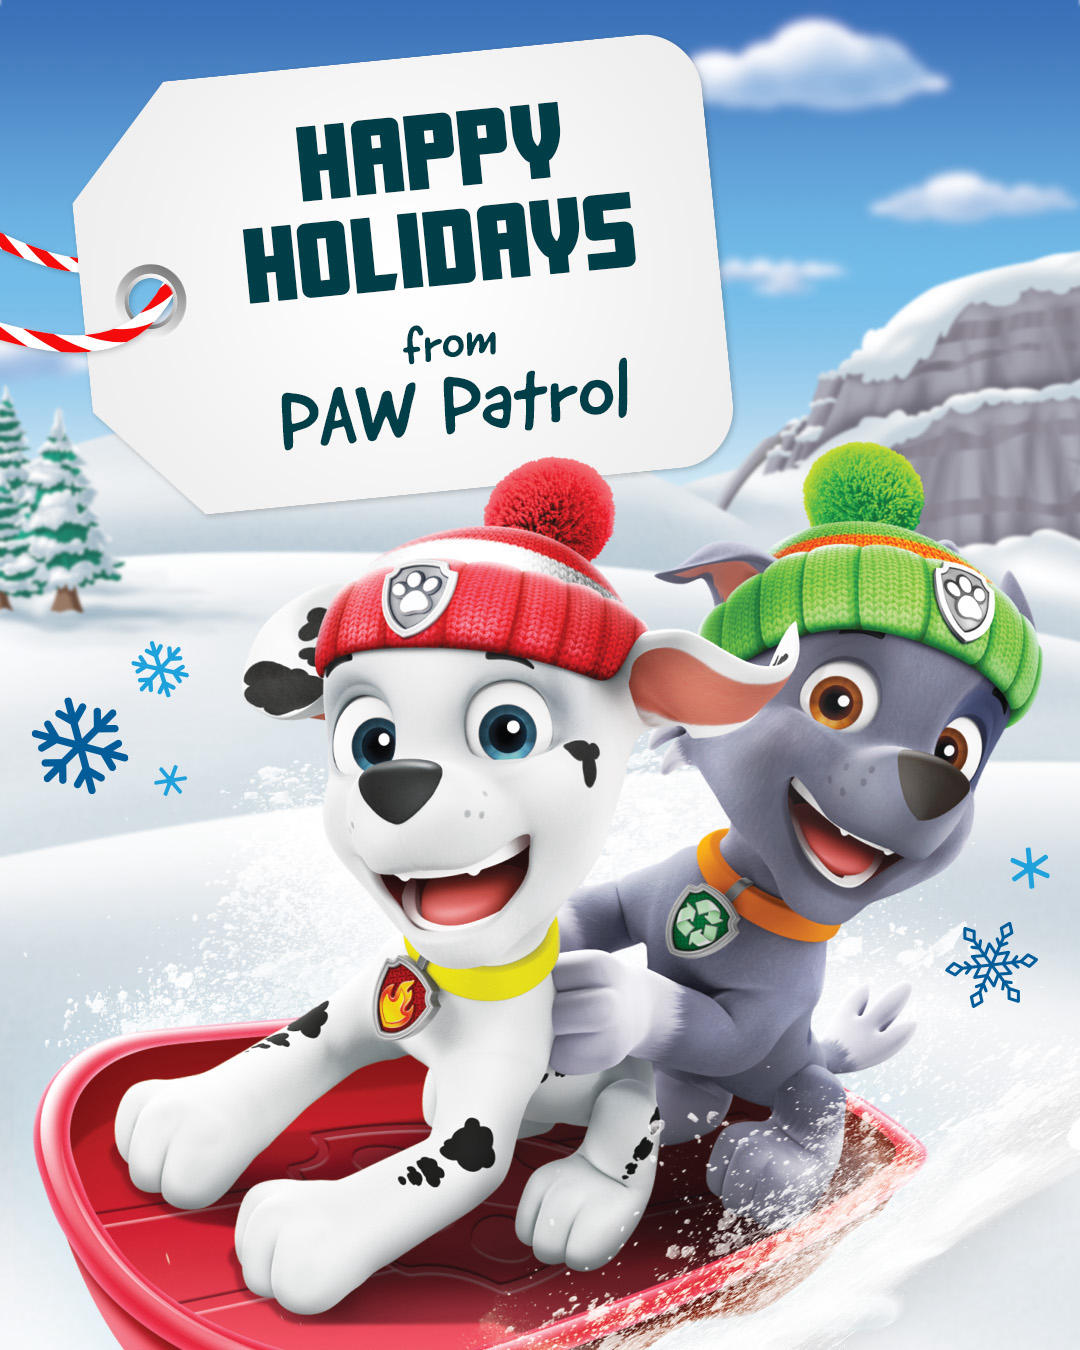 PAW Patrol - Happy Holidays from our PAW family to yours